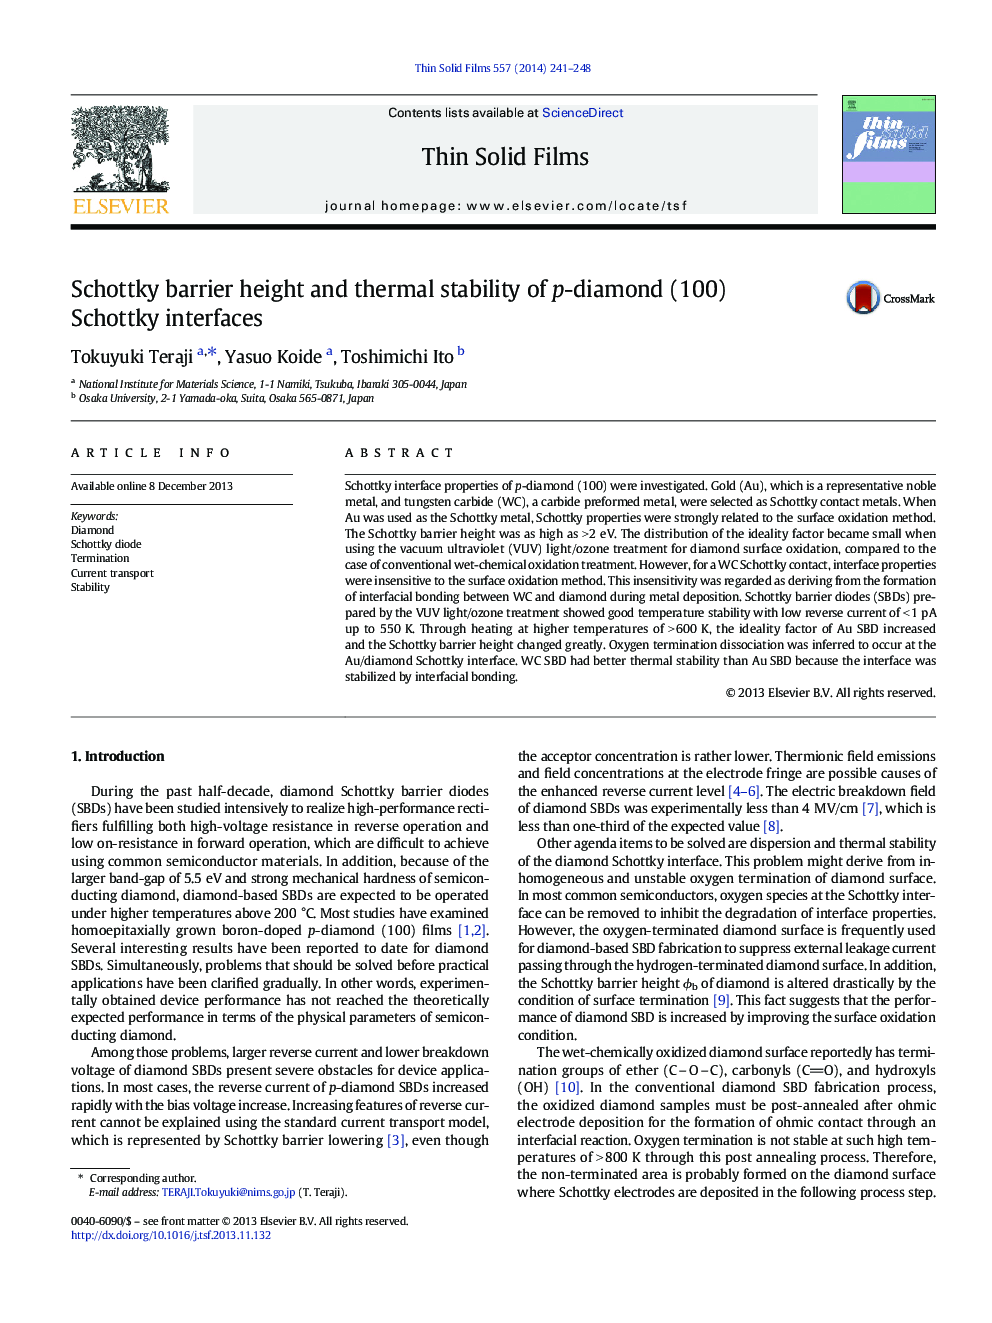 Schottky barrier height and thermal stability of p-diamond (100) Schottky interfaces